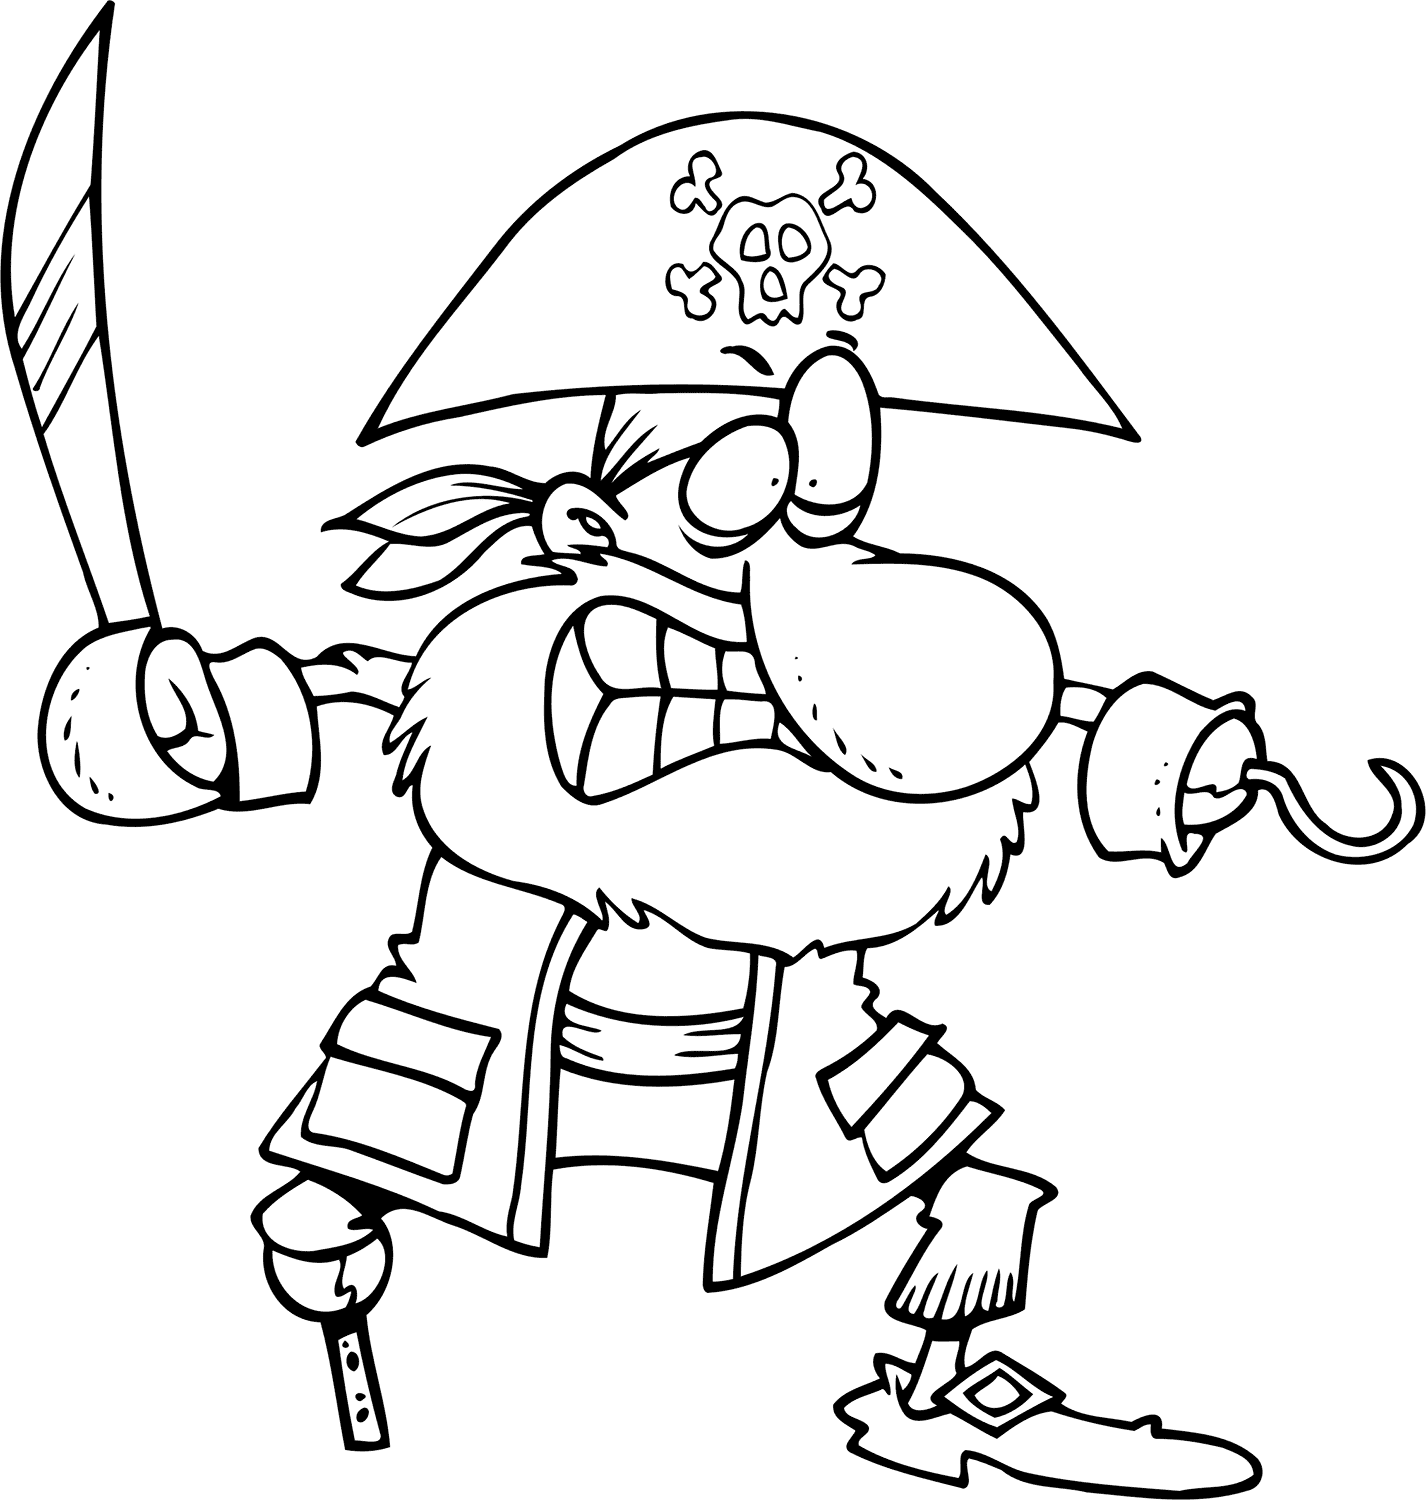 Funny Cartoon Pirate Coloring Pages - Pirate Coloring Pages - Coloring  Pages For Kids And Adults